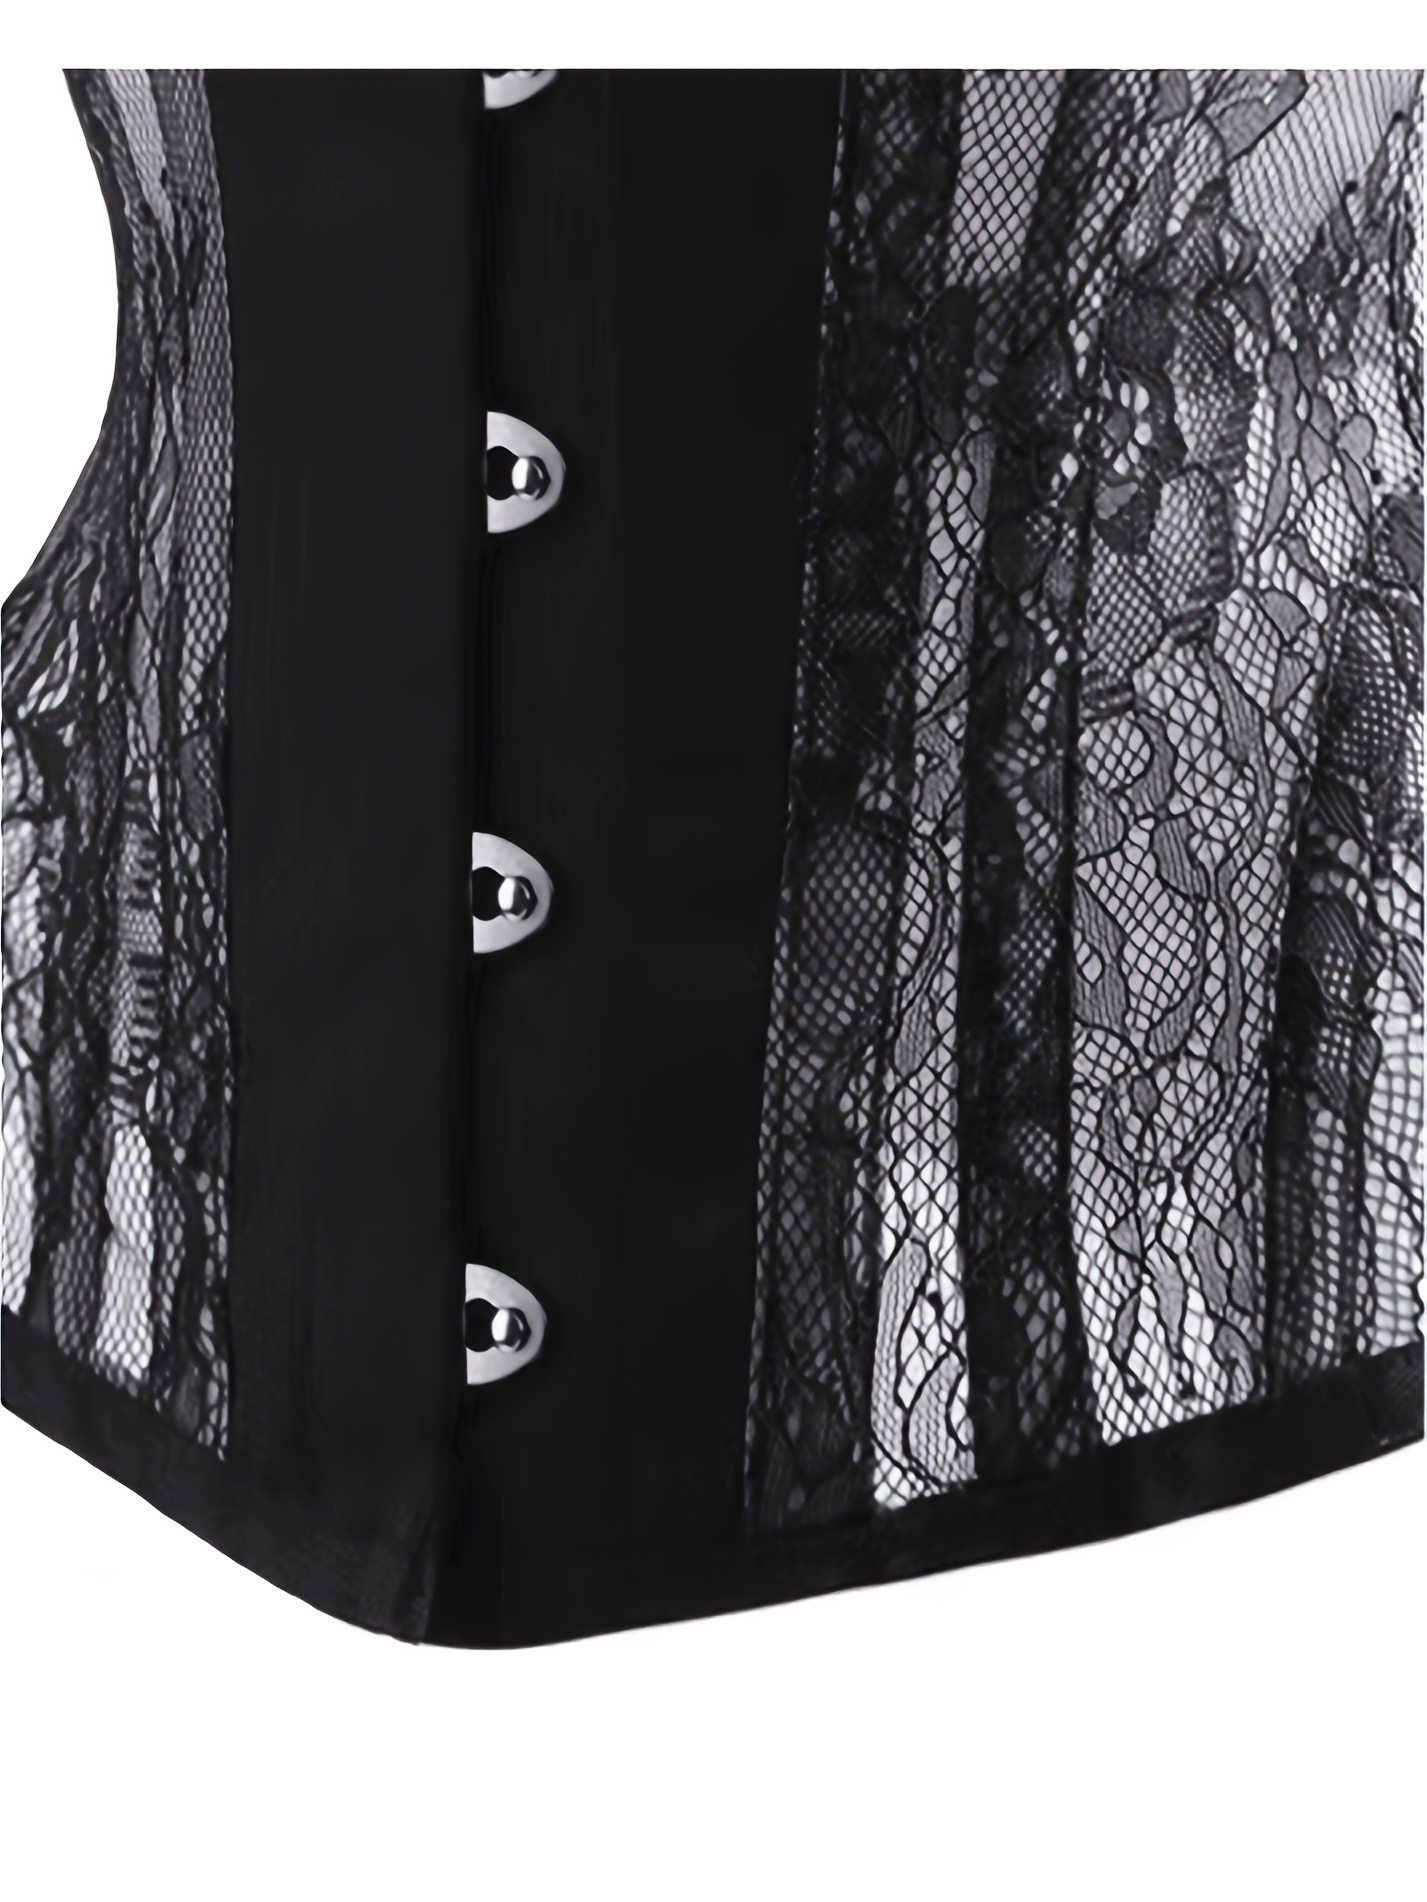 Sexy Brocade Jacquare Steel Boned Longline Plus Size Corset Bodysuit With  Padded Lace Up Bustier For Womens Clubwear Plus Size S 6XL From Bestielady,  $17.75